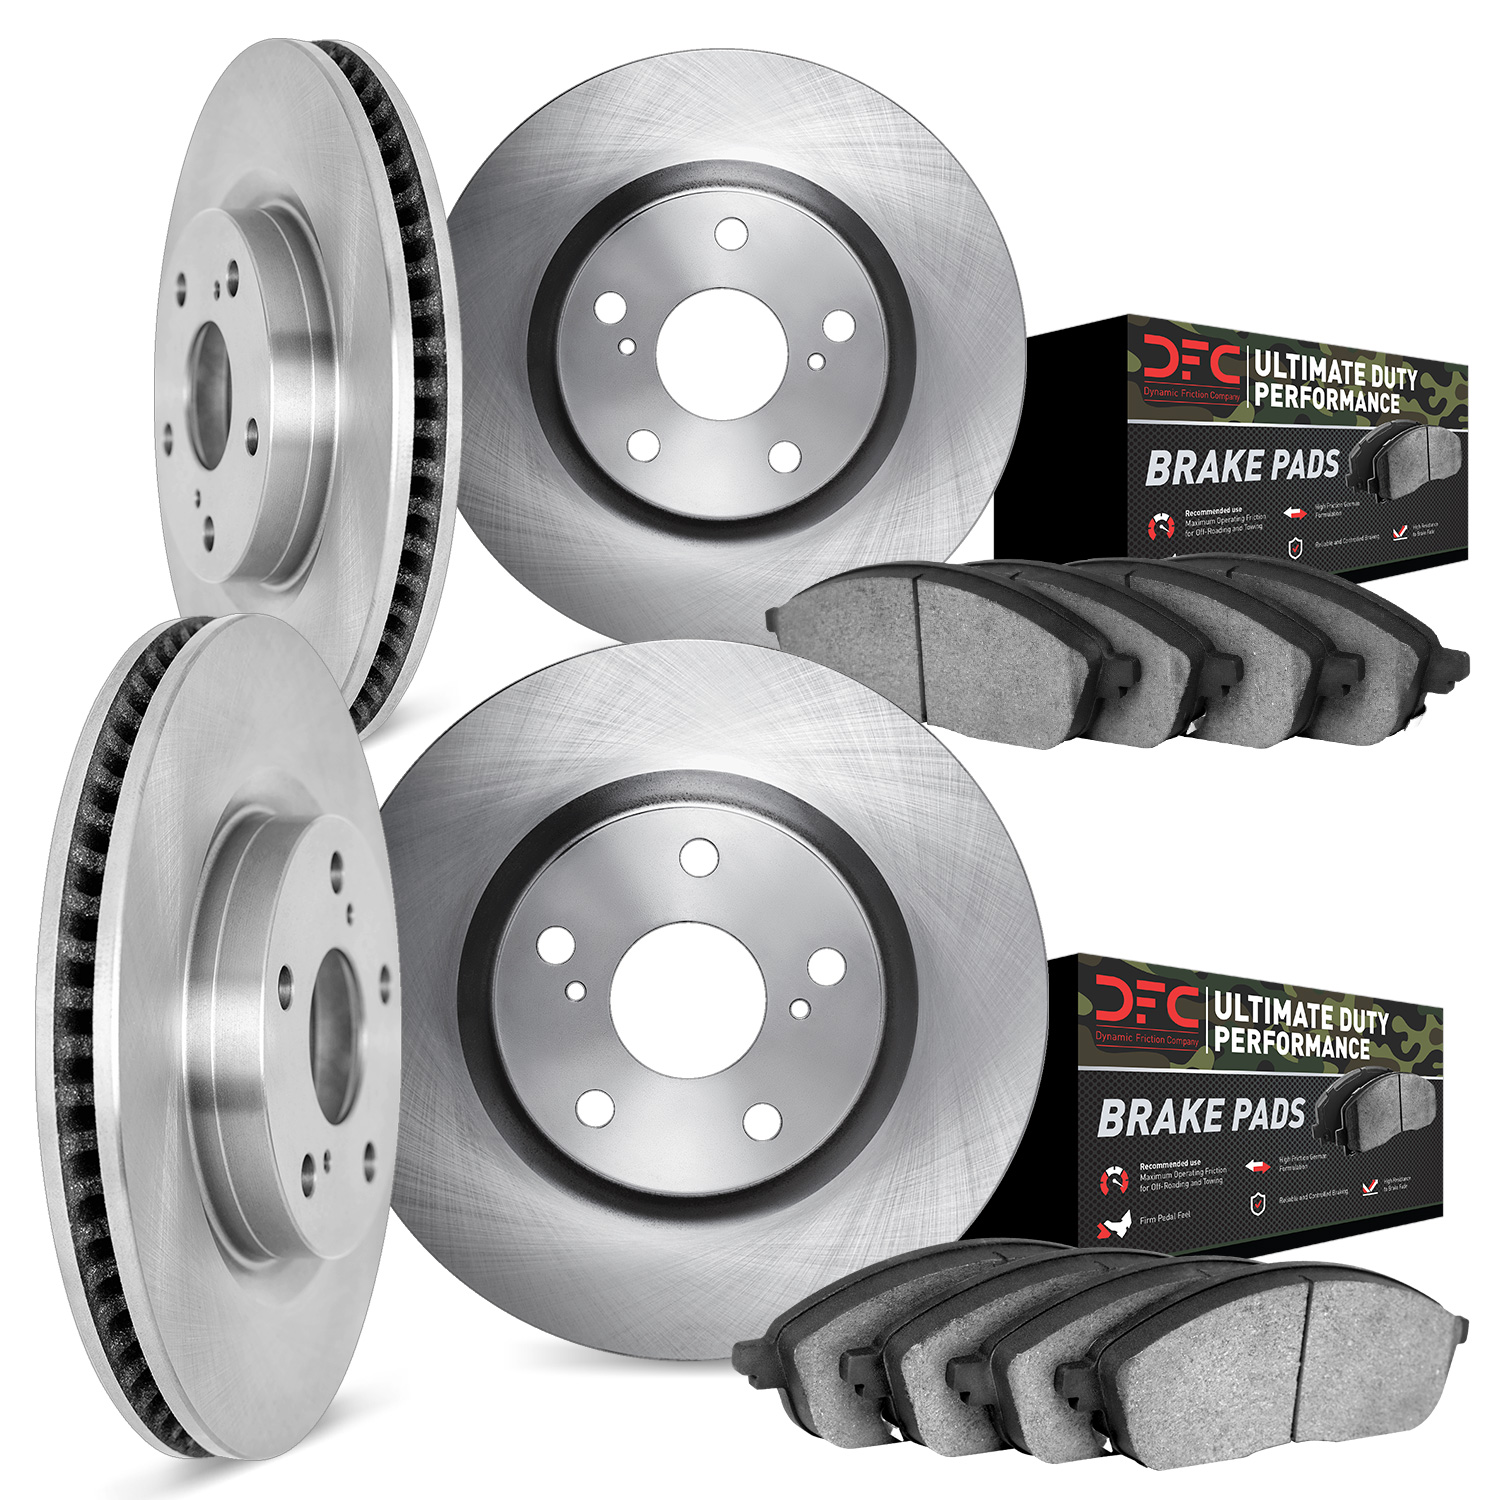 6404-40009 Brake Rotors with Ultimate-Duty Brake Pads, 2008-2012 Mopar, Position: Front and Rear